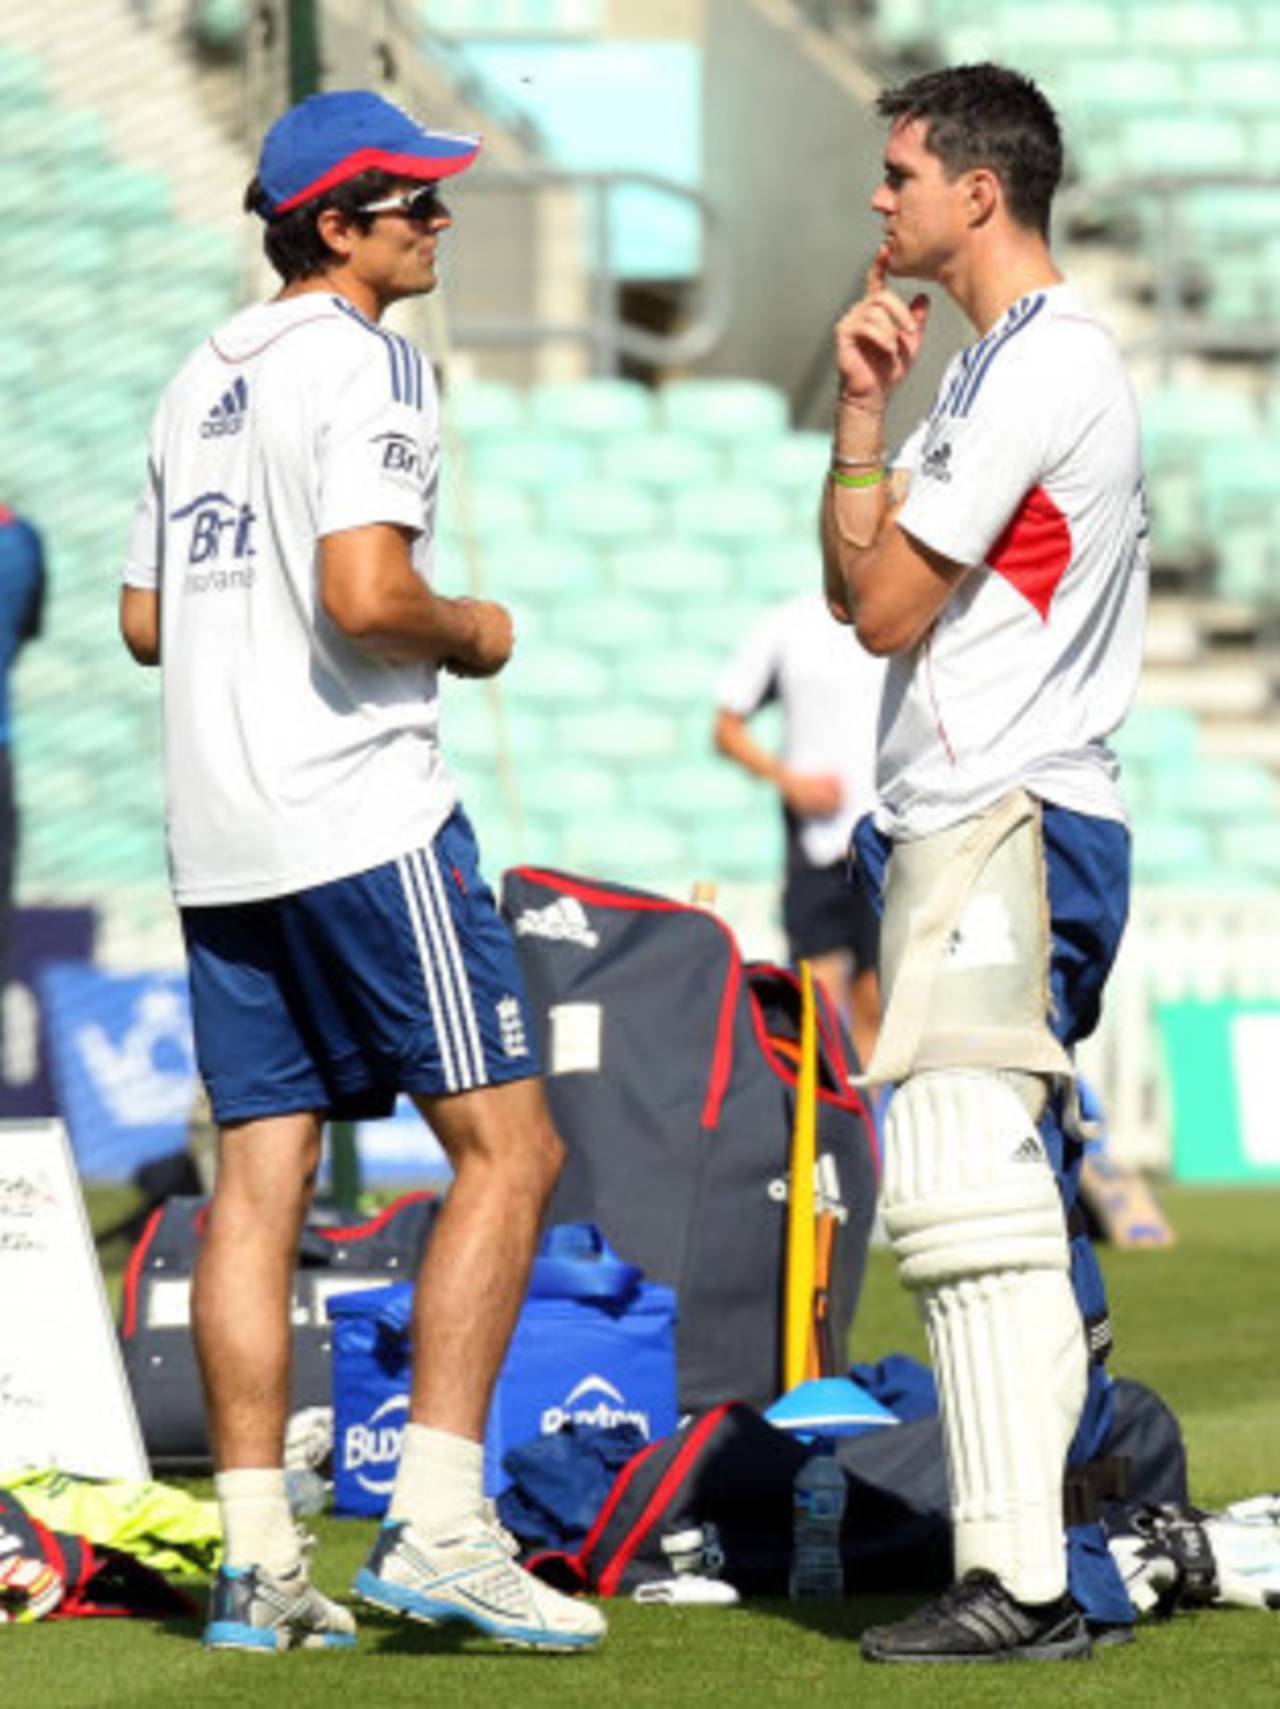 Alastair Cook and Kevin Pietersen at England practice, England v Australia, 5th Investec Test, The Oval, August 20, 2013